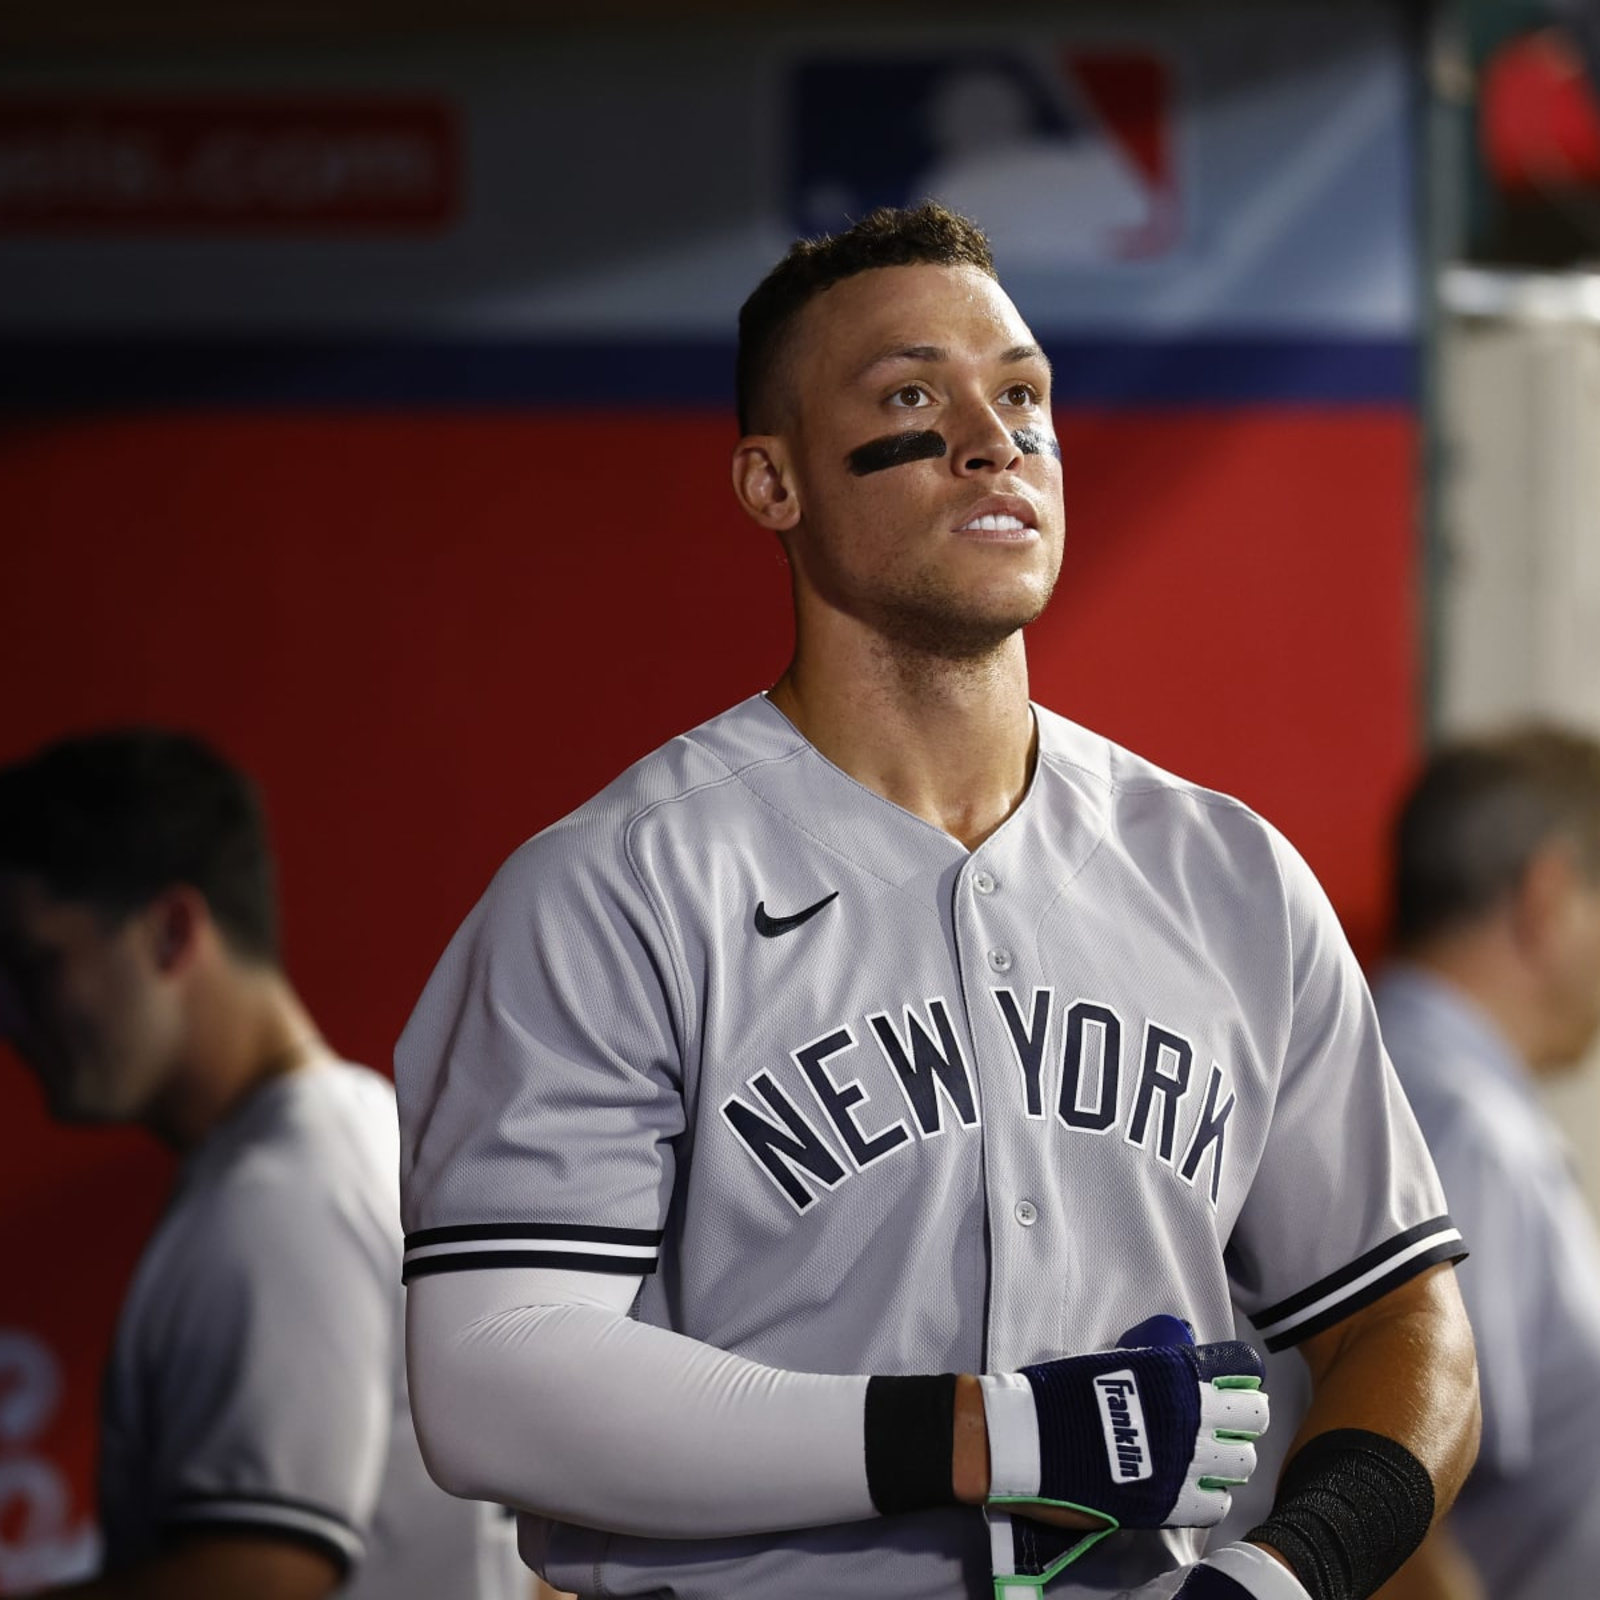 Yankees Rumors: Aaron Judge Expected by 'Most' to Sign New